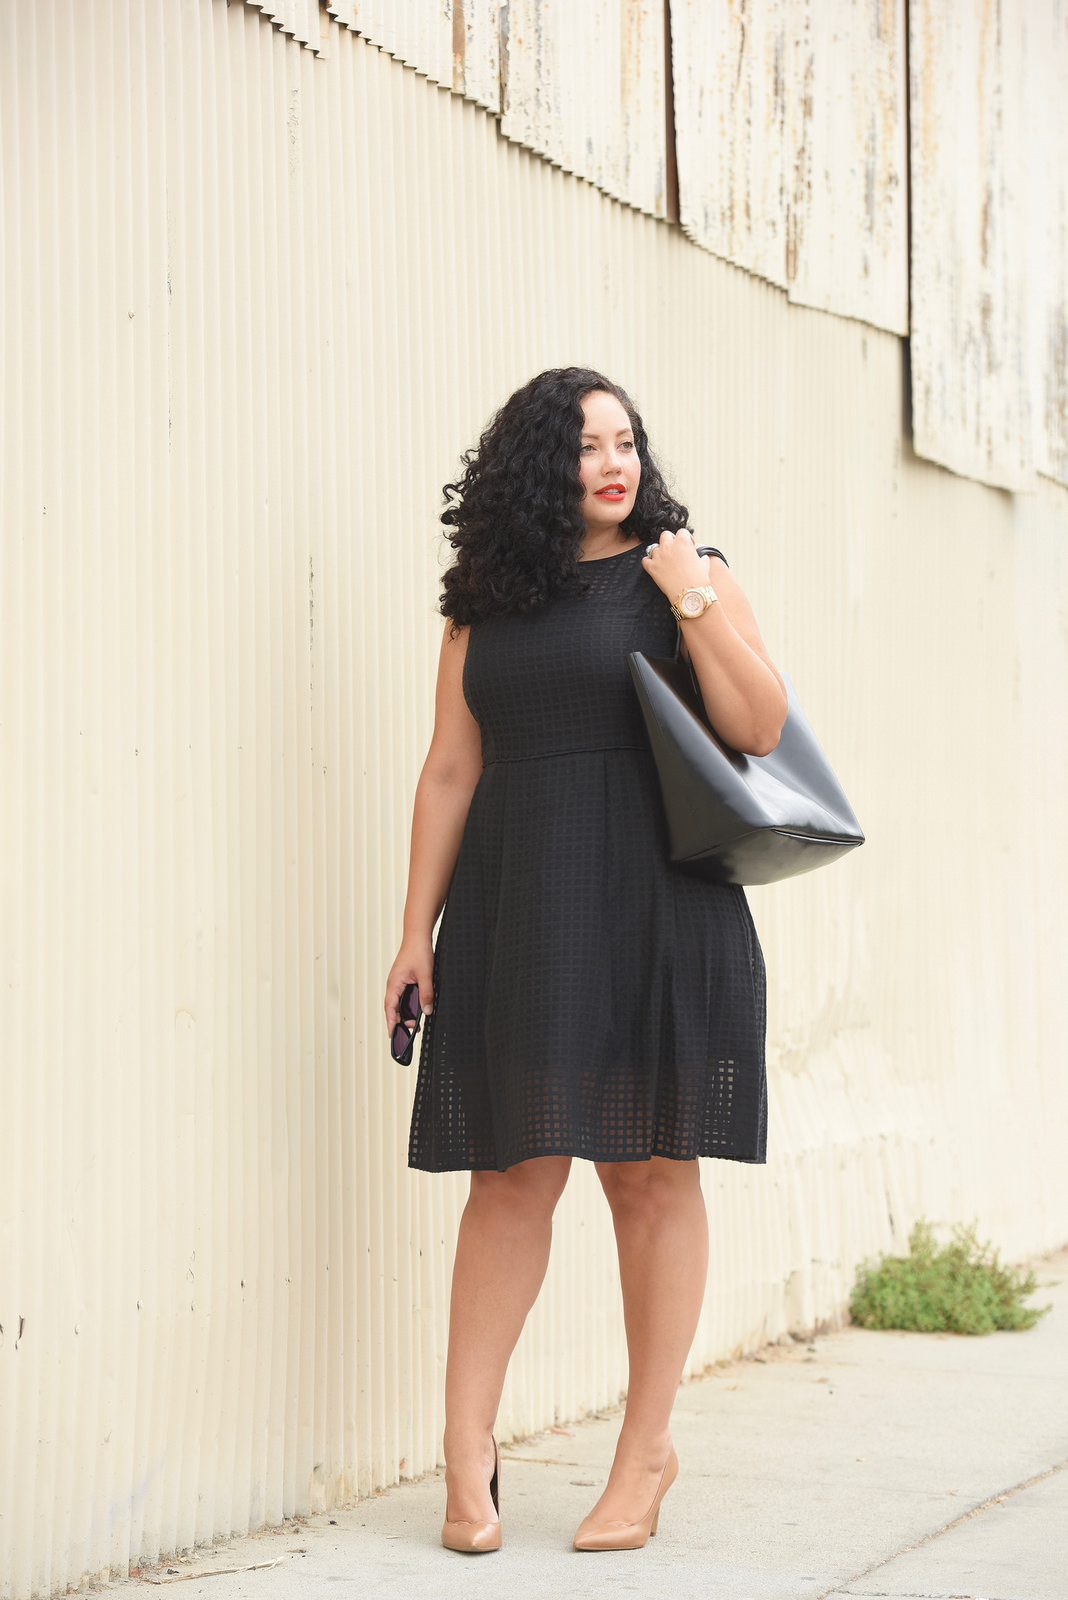 Tanesha Awasthi, also known as Girl With Curves, wearing a plus size gingham midi dress.